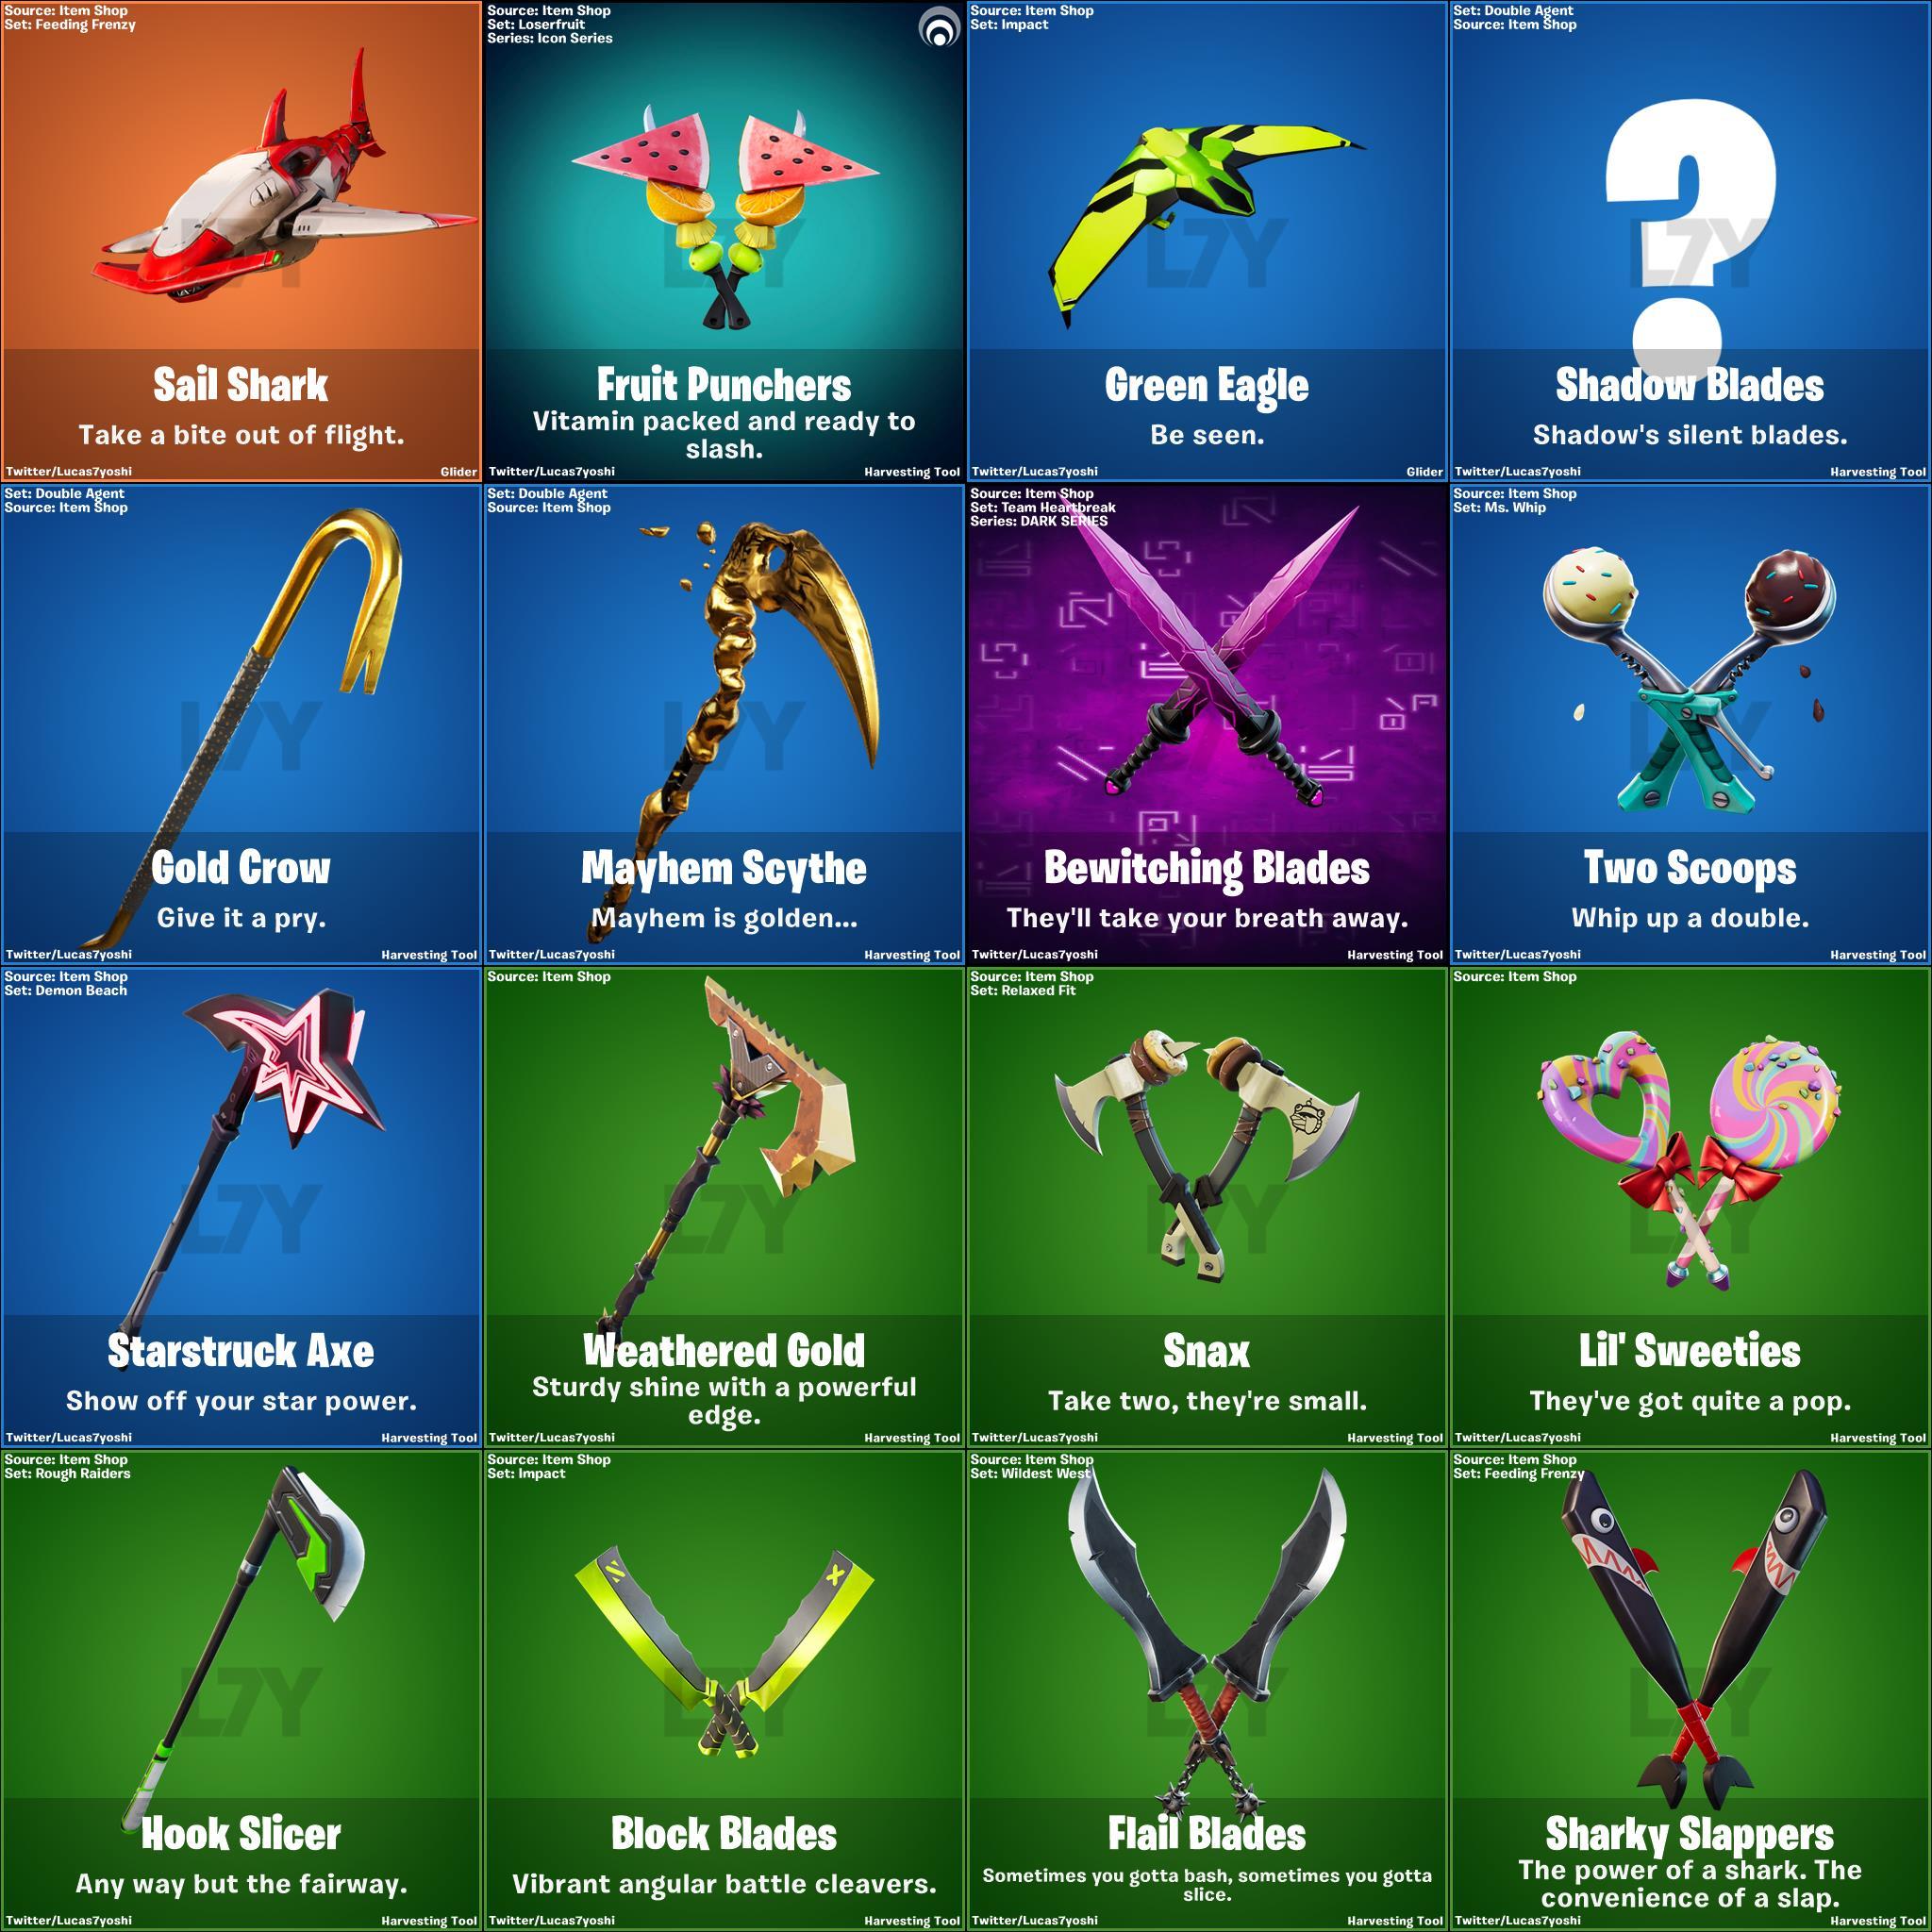 Leaked pickaxes and gliders from Fortnite Patch v13.20